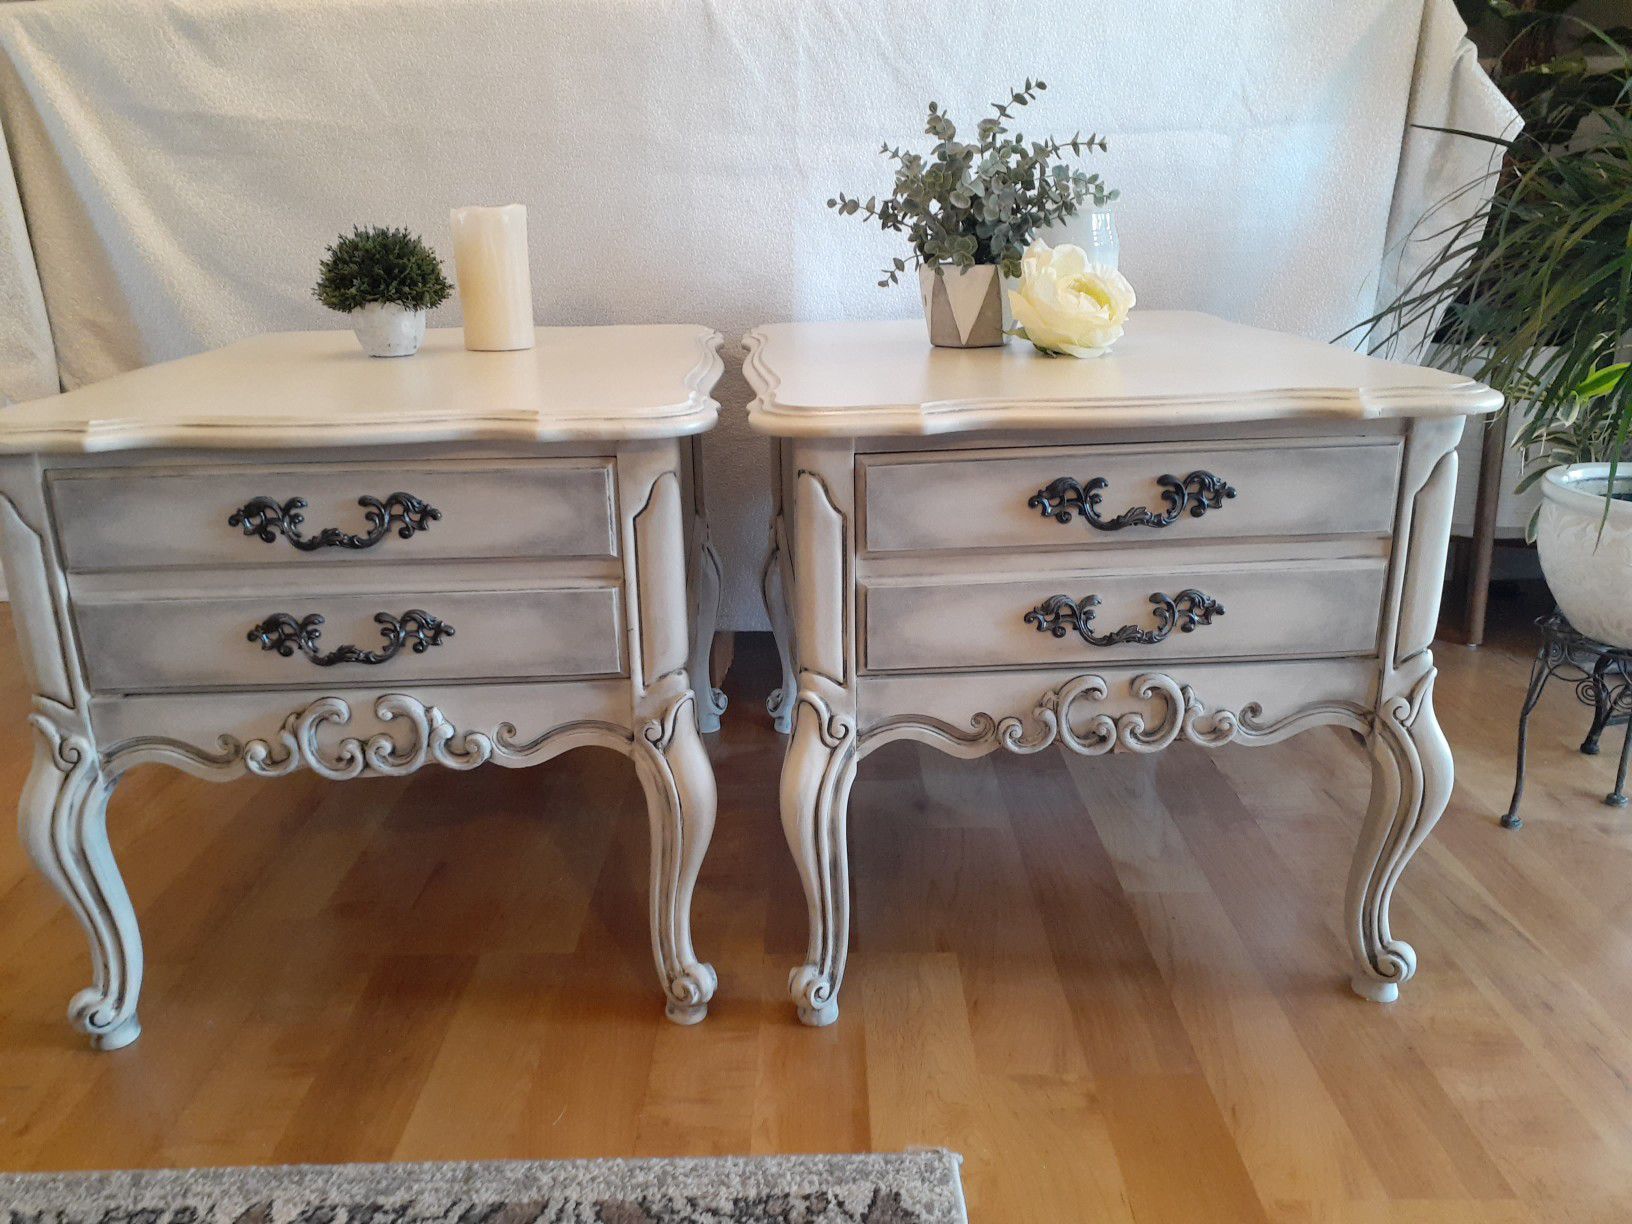 Set of beautiful end tables